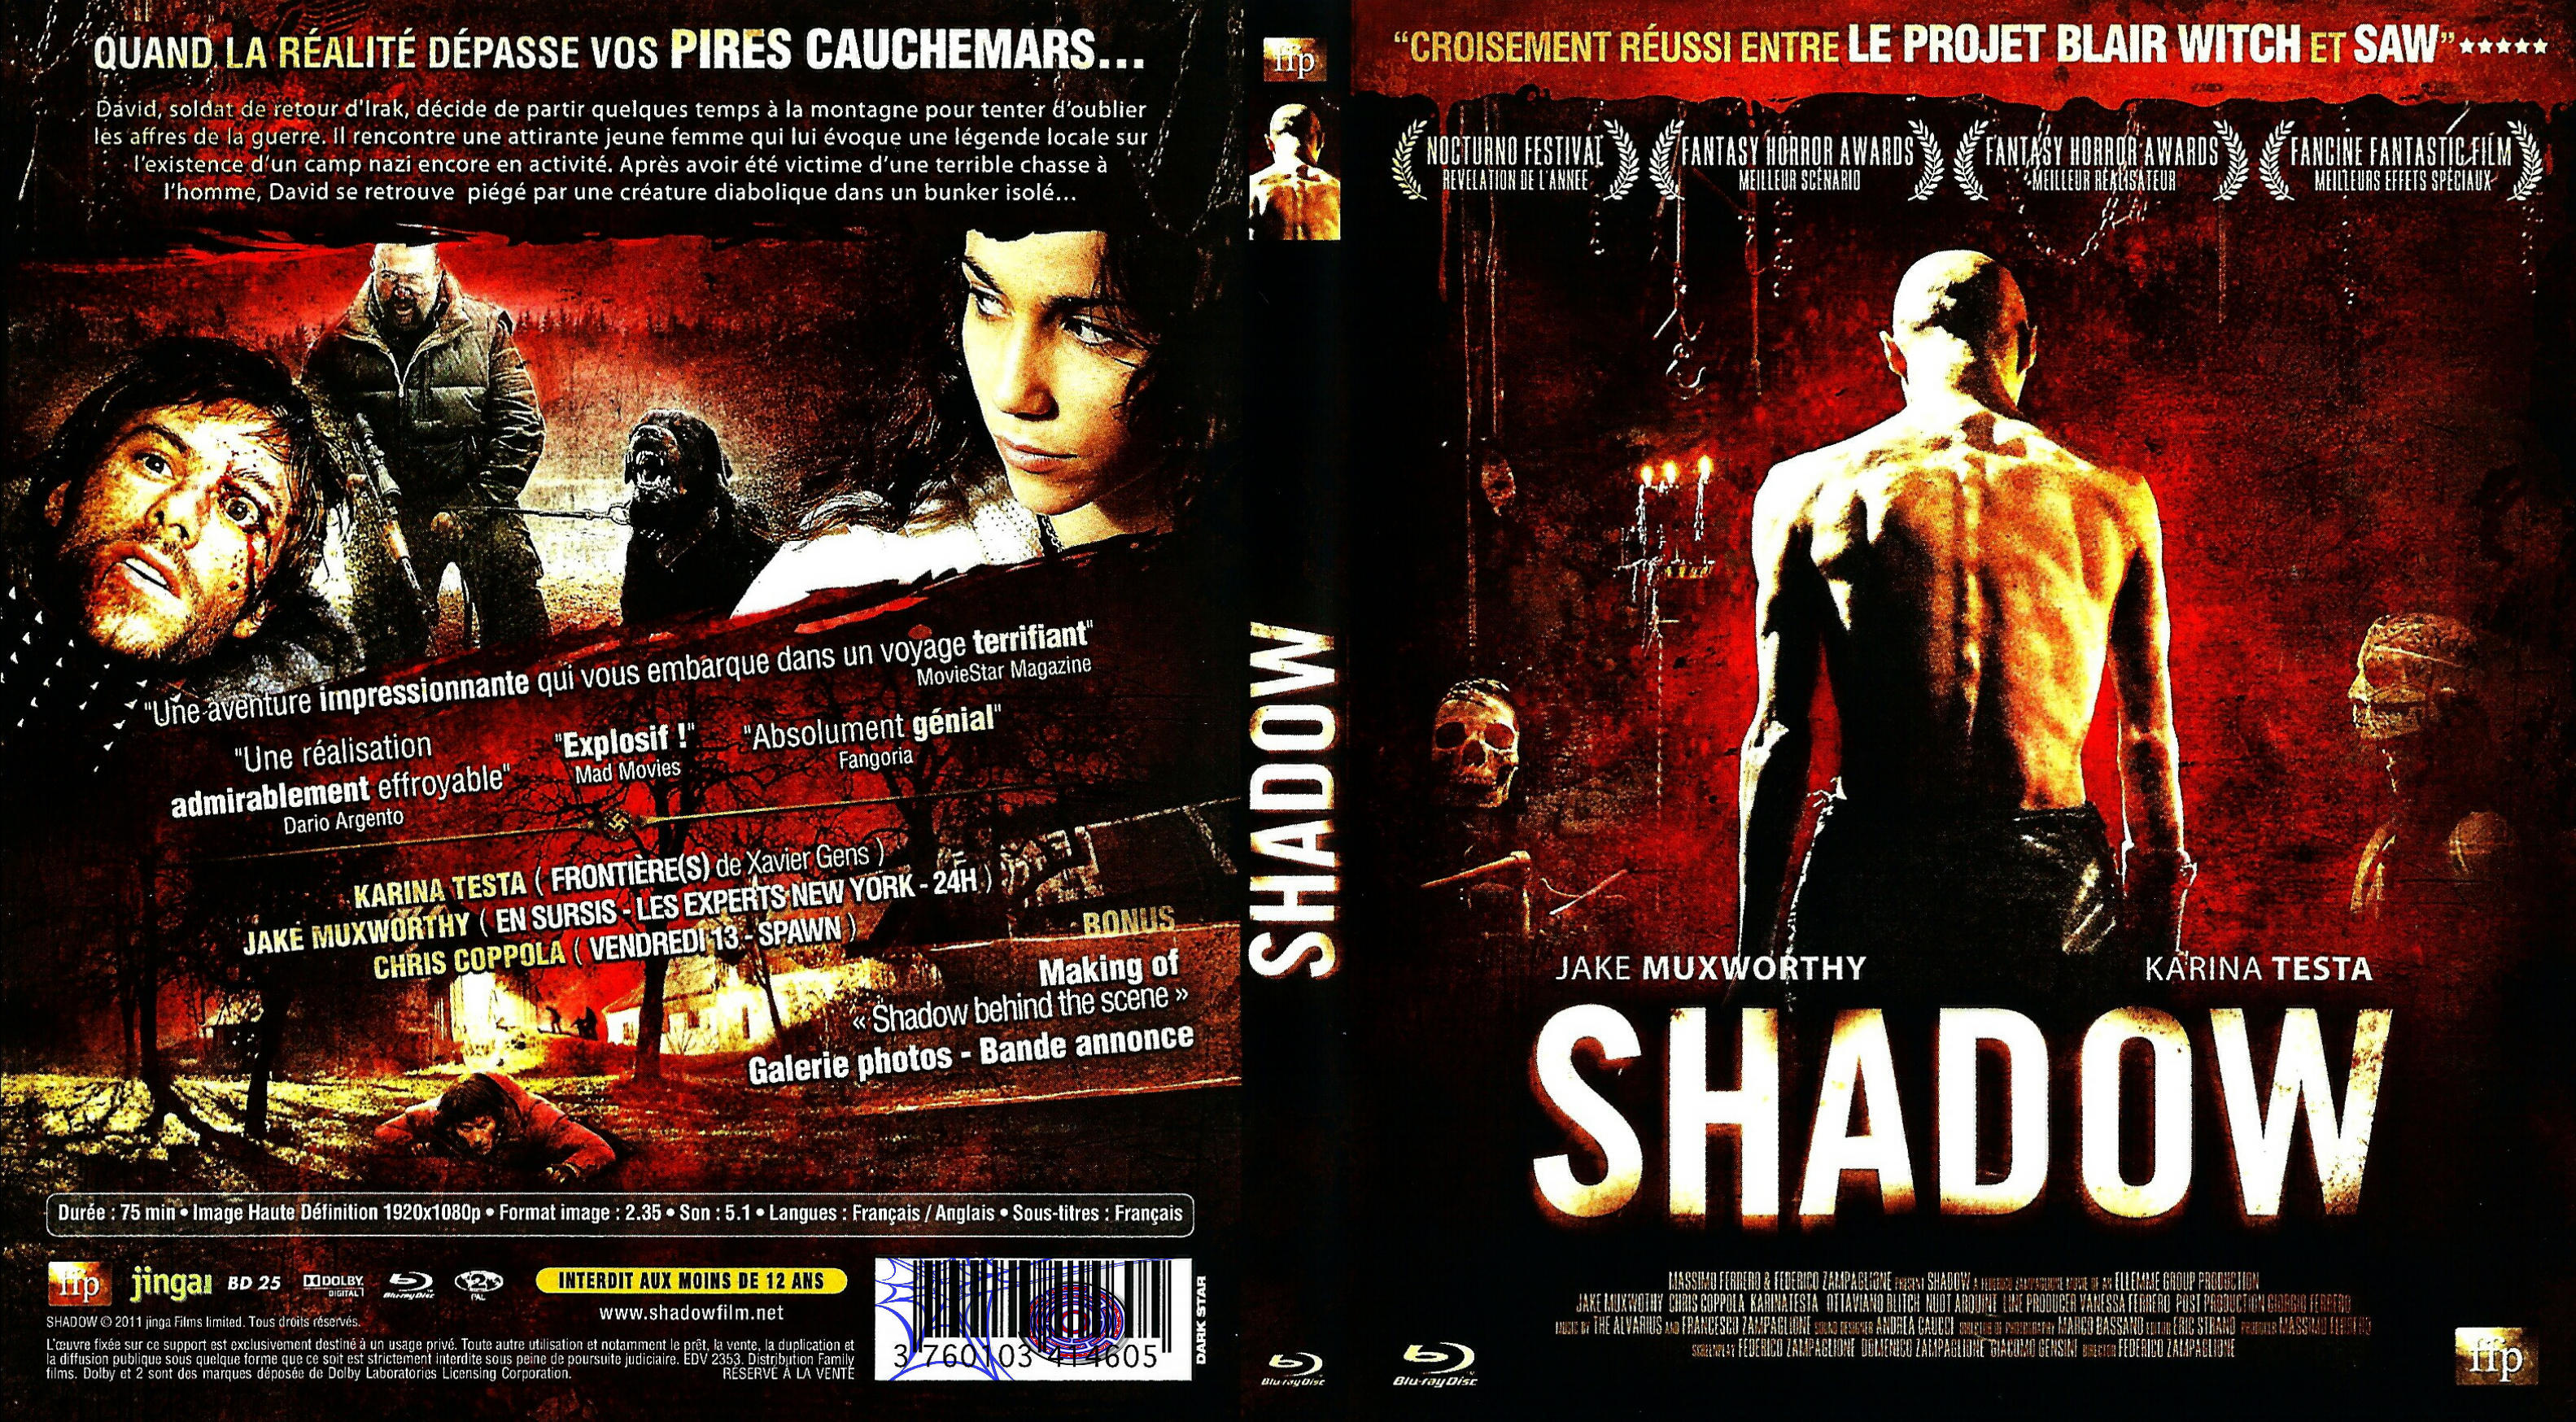 Jaquette DVD Shadow (BLU-RAY)